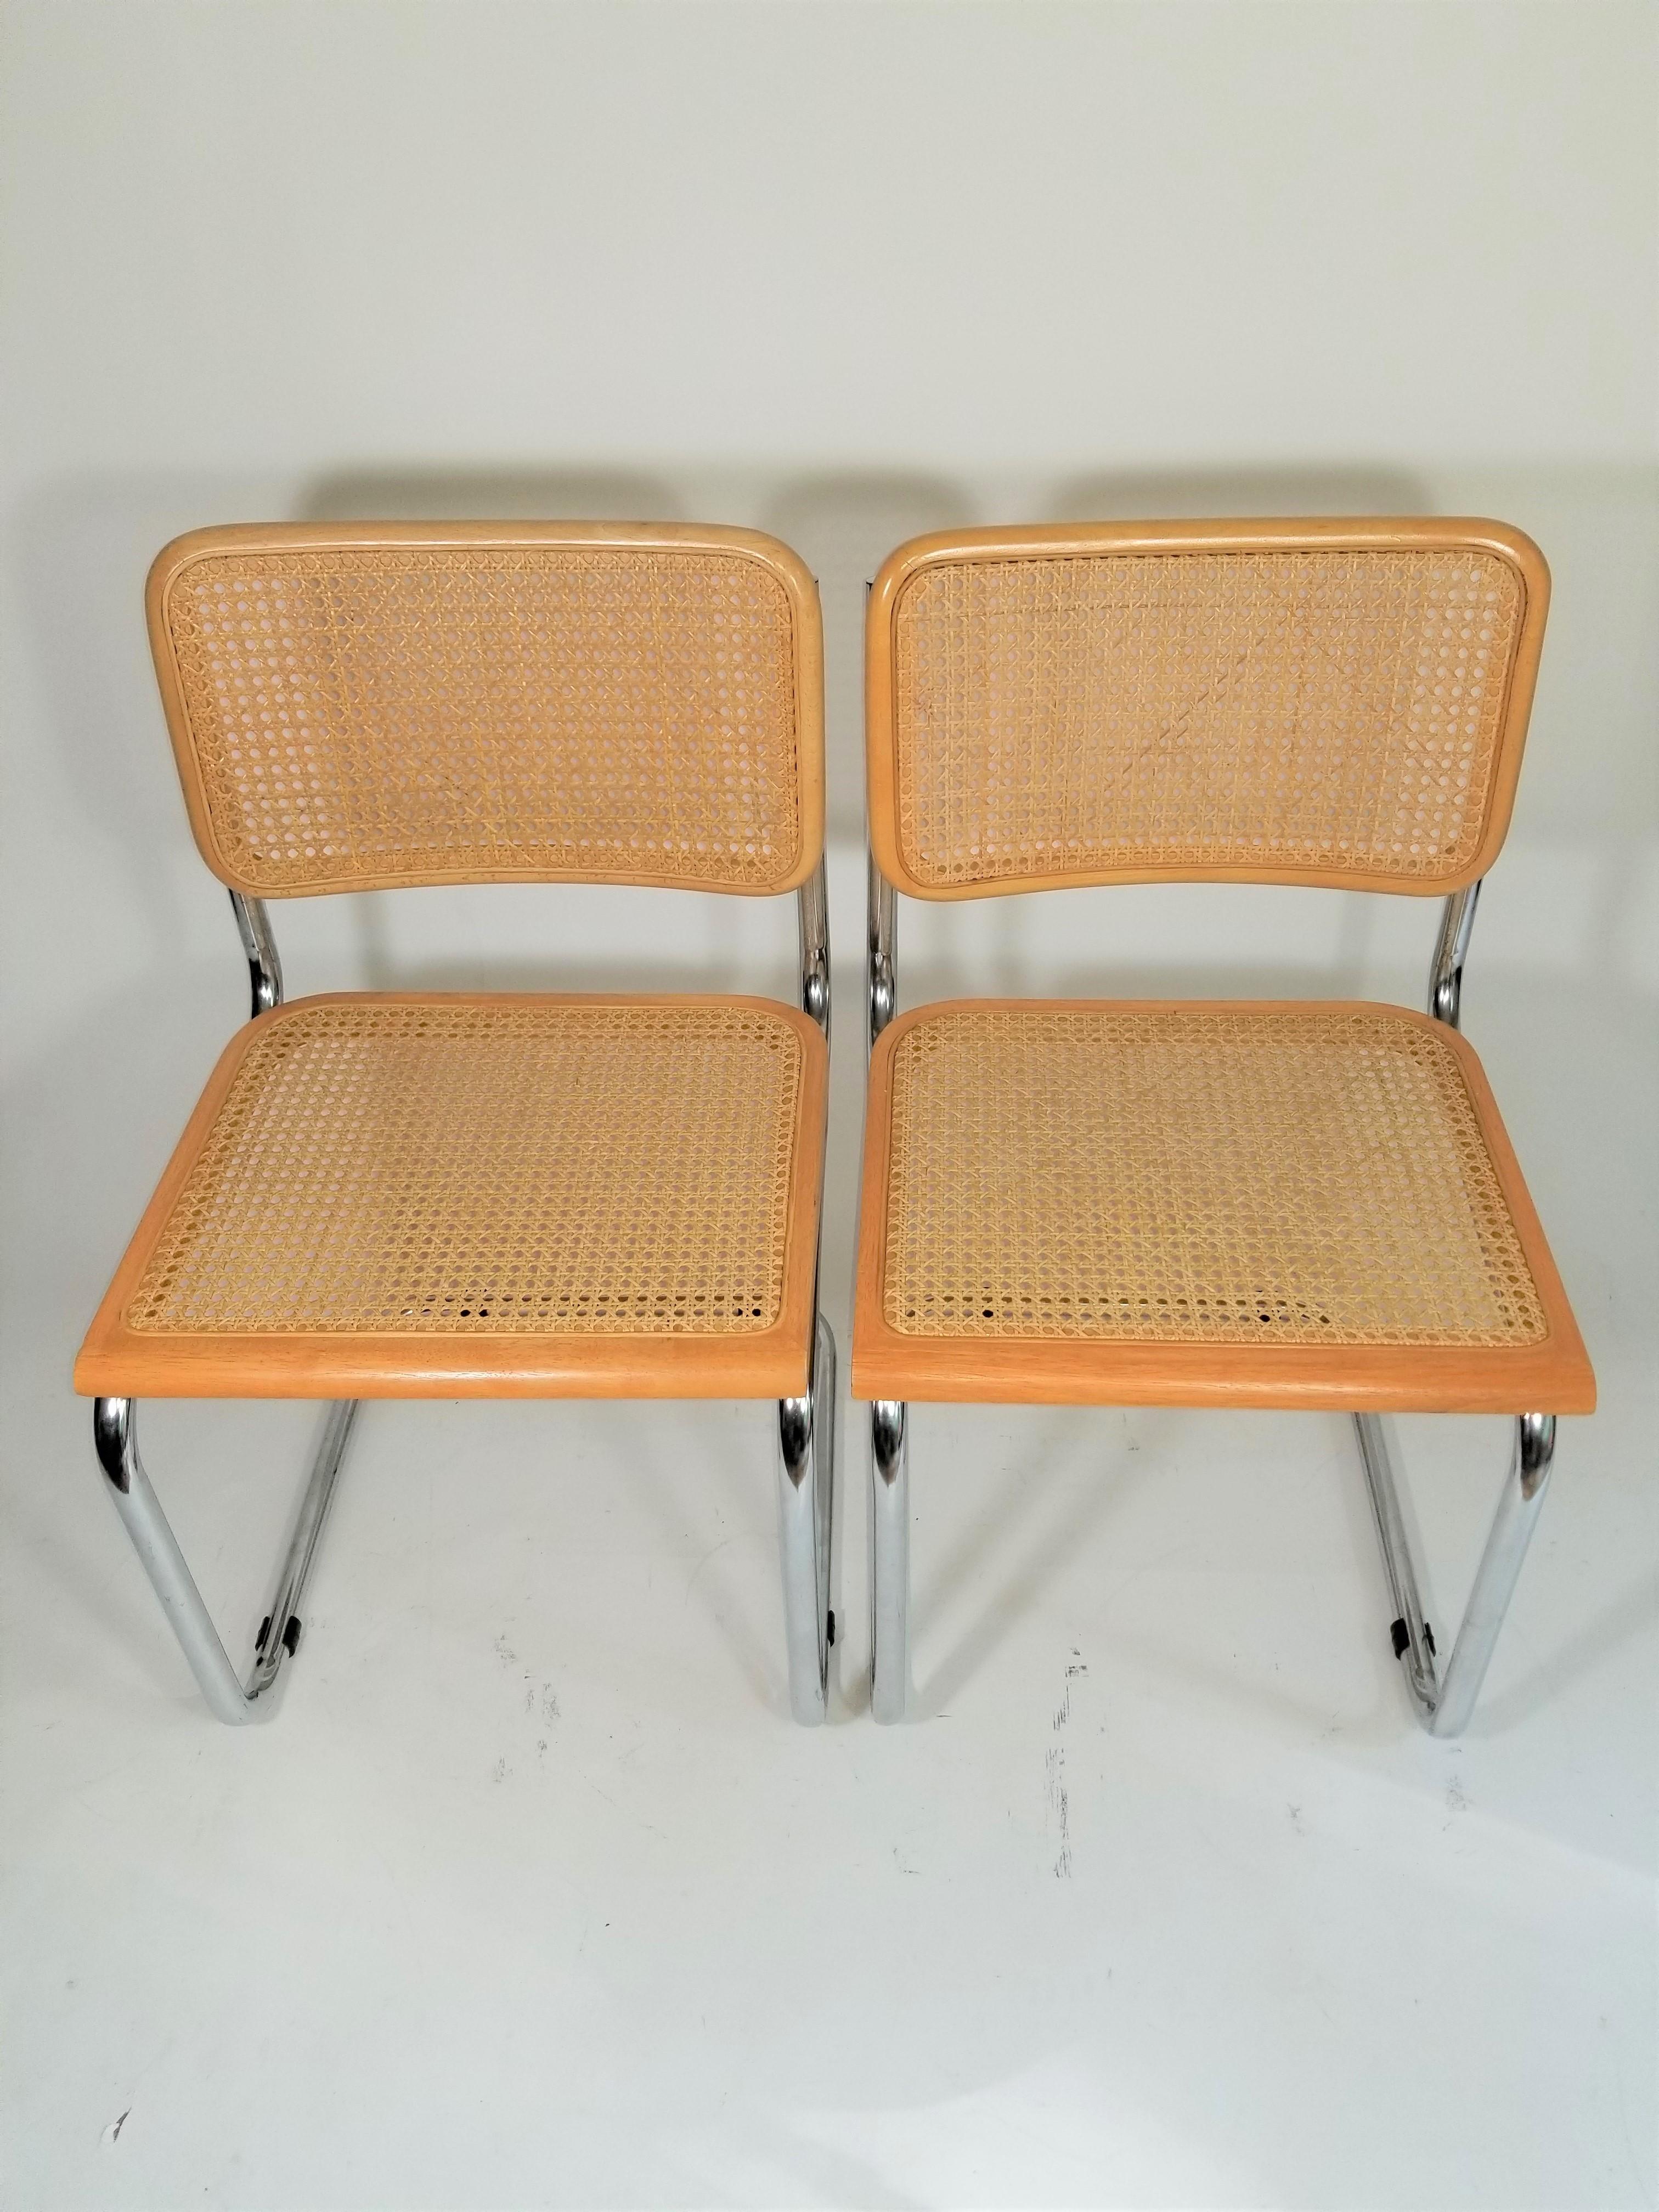 Pair of midcentury Marcel Breuer Cesca side chairs. Cane seat and back. Classic chrome tubular frame. Made in Italy.

Complimentary free delivery is available in NYC and surrounding areas.

Measurements:
Height 32 inches
Width 18 inches
Depth